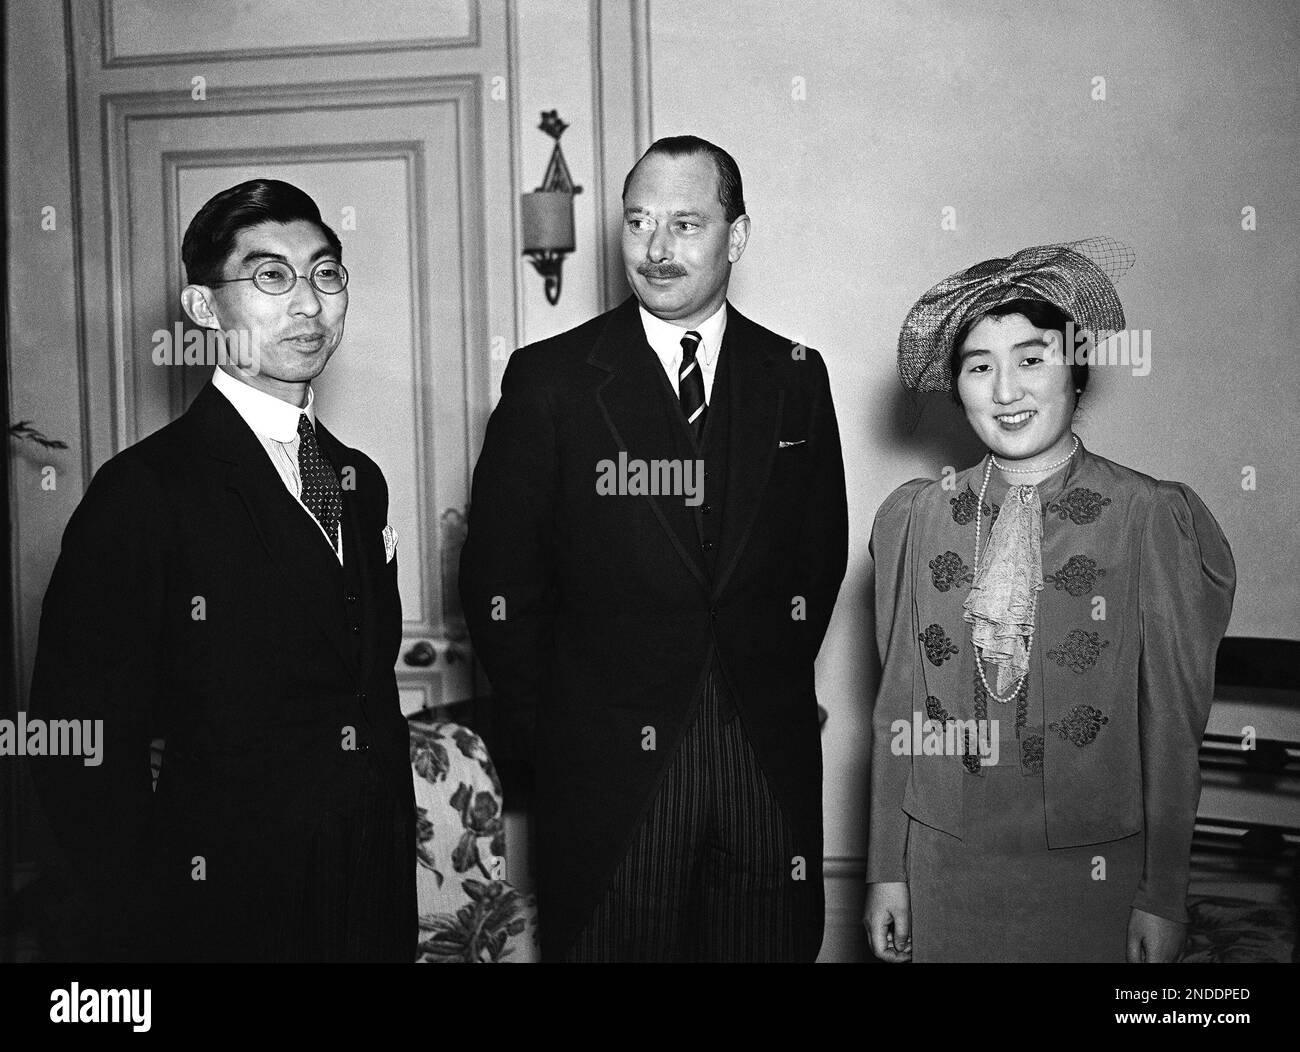 Britain's Prince Henry, the Duke of Gloucester, center, with the Yasuhito, Prince Chichibu of Japan and wife Setsuko, Princess Chichibu at a London Hotel on April 13, 1937. The Japanese royals are over to represent Japan at the coronation celebrations. (AP Photo/Staff/Len Puttnam) Banque D'Images